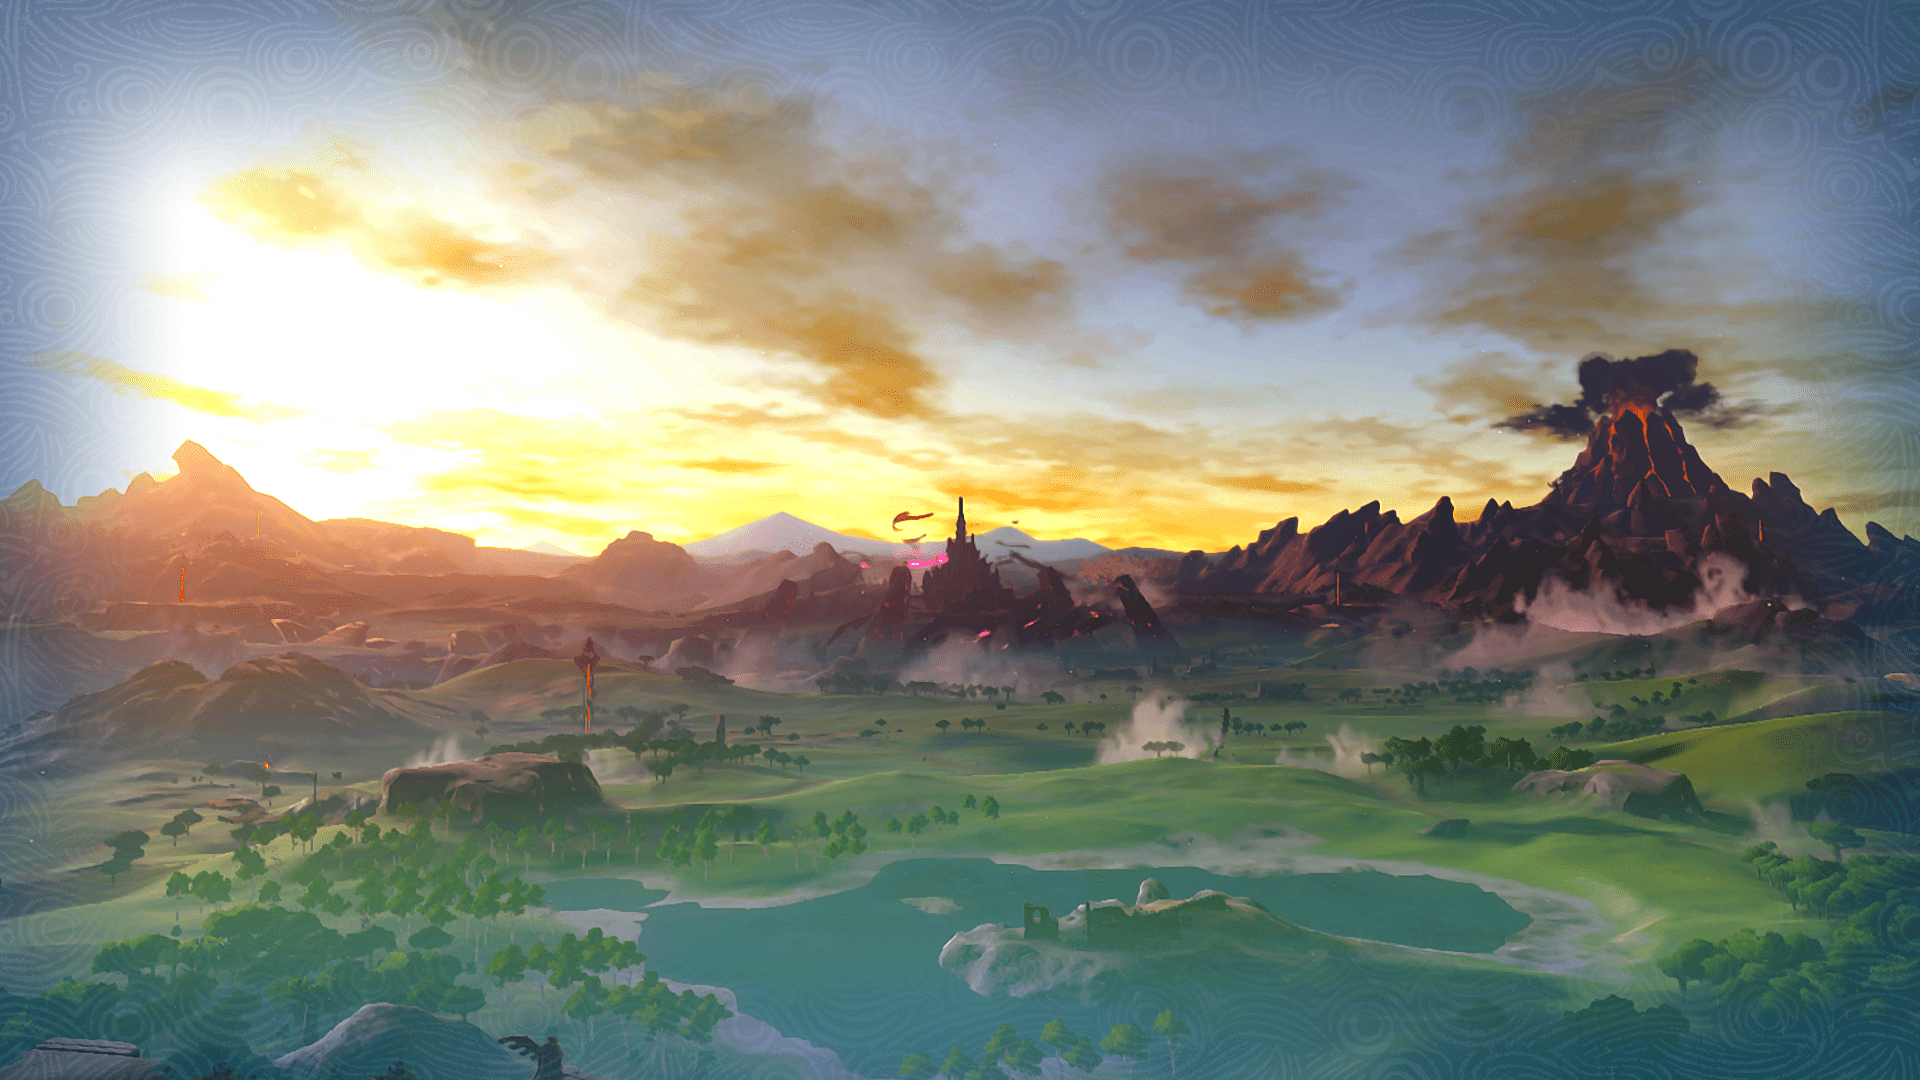 Download The magical world of Hyrule in The Legend of Zelda series Wallpaper  | Wallpapers.com